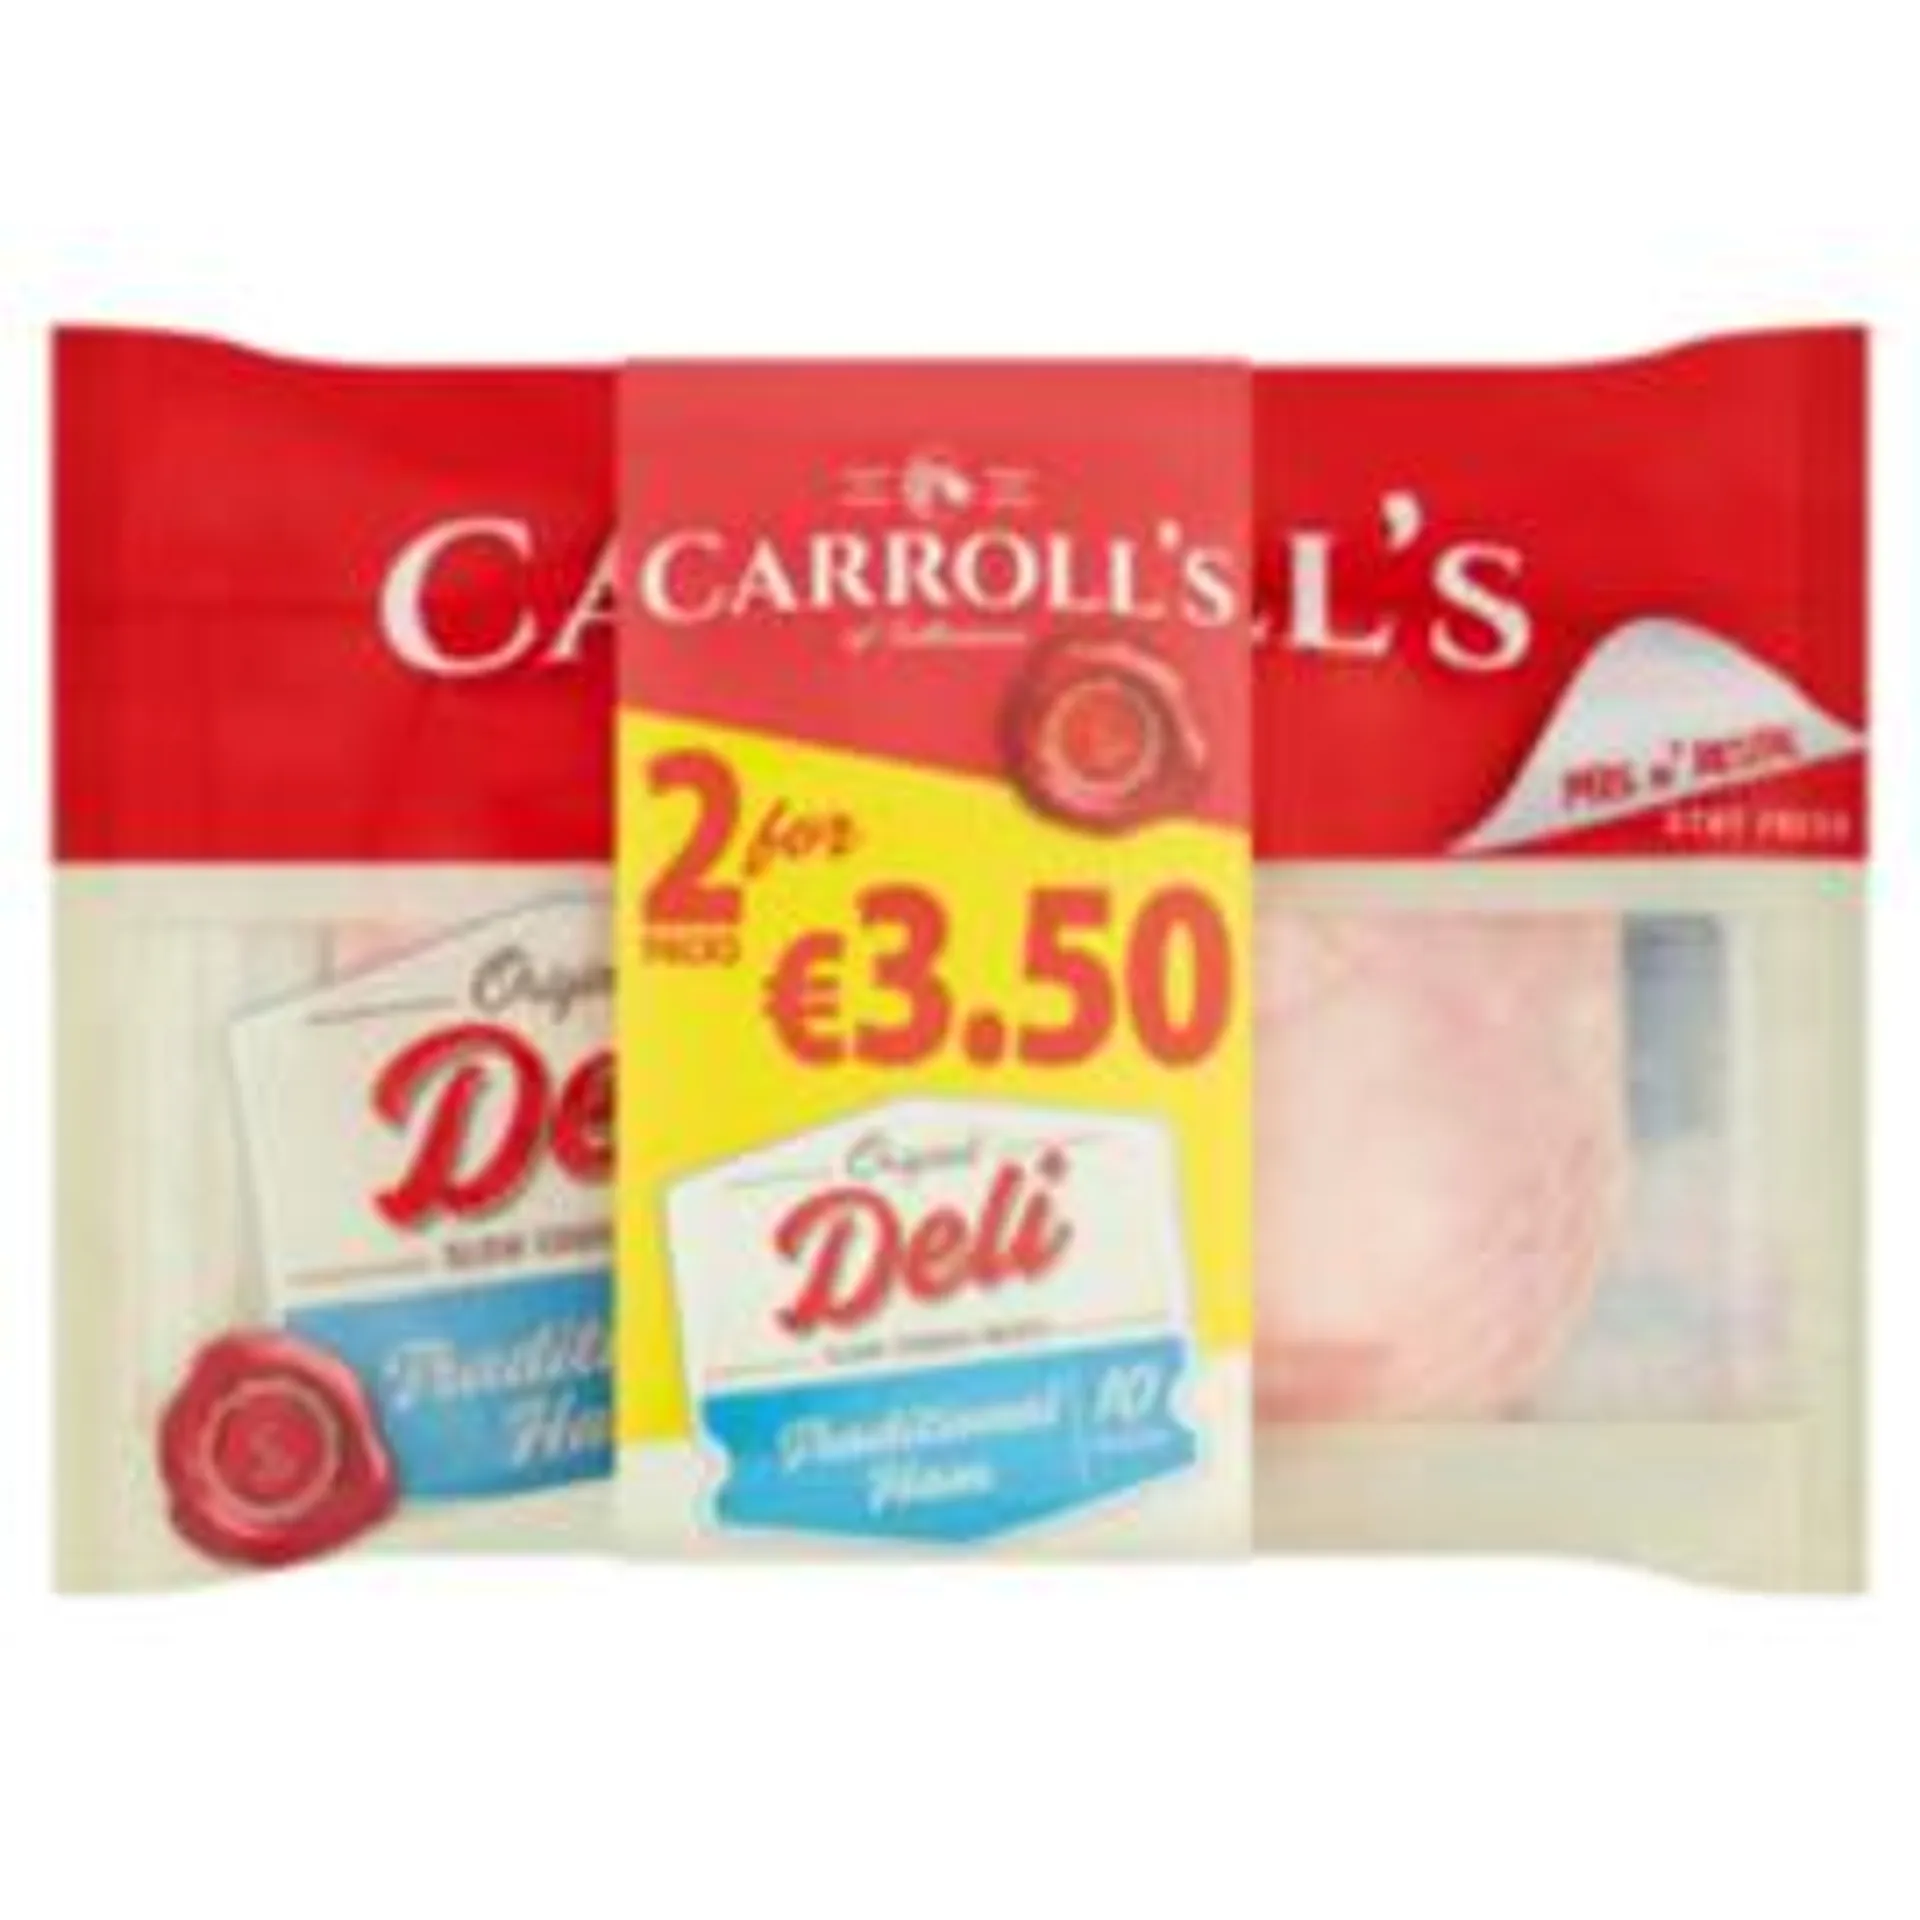 Carroll's Traditional Ham Twin Pack 2 for €3.50 PMP